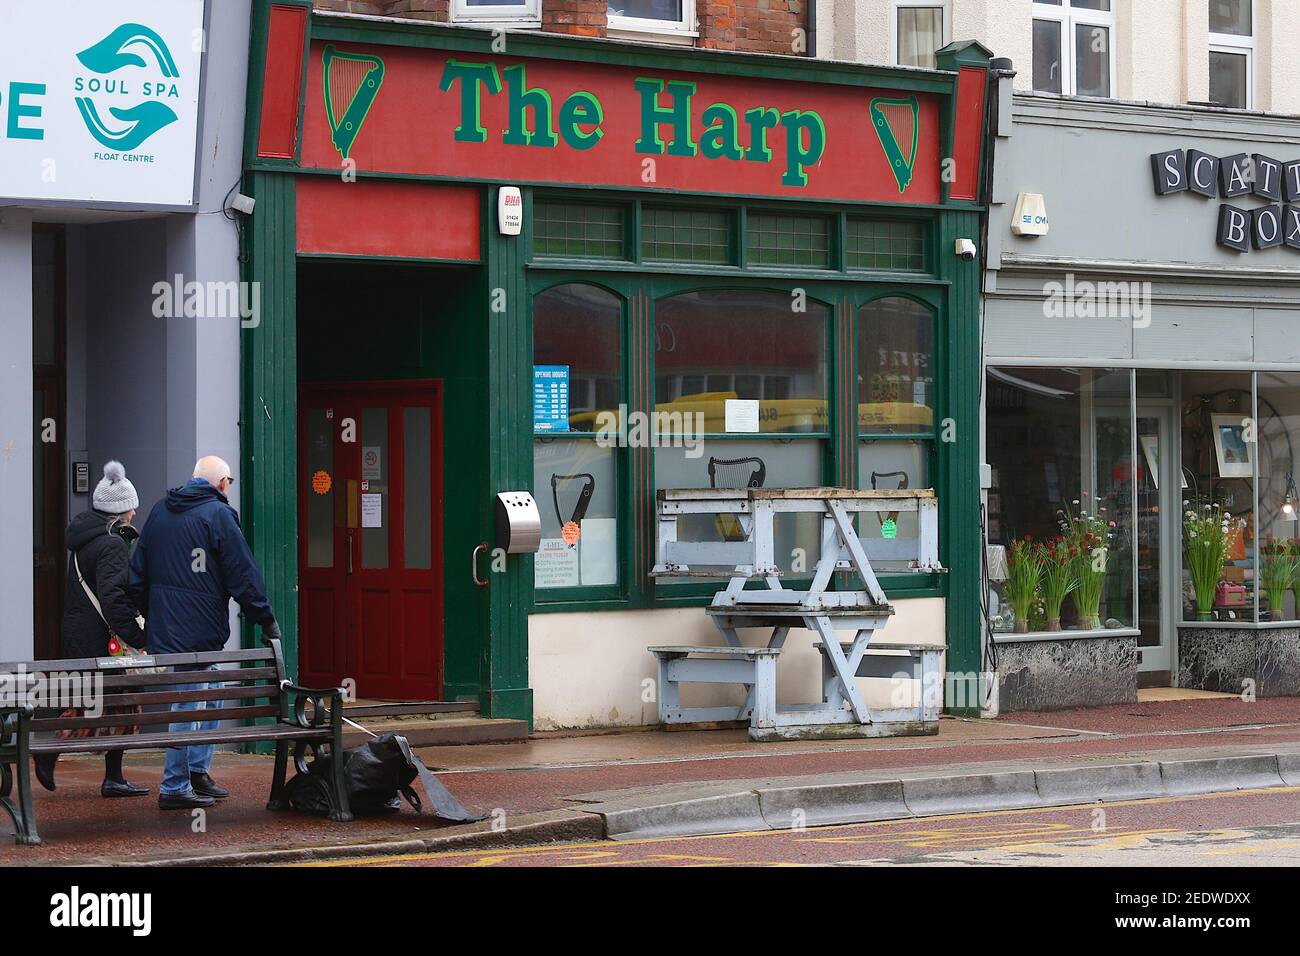 Bexhill-on-Sea, East Sussex, UK. 15 Feb, 2021. UK Weather: A breezy and overcast day in the small seaside town of Bexhill with the weather expected to improve later in the week. Closed down The Harp pub. Photo Credit: Paul Lawrenson/Alamy Live News Stock Photo